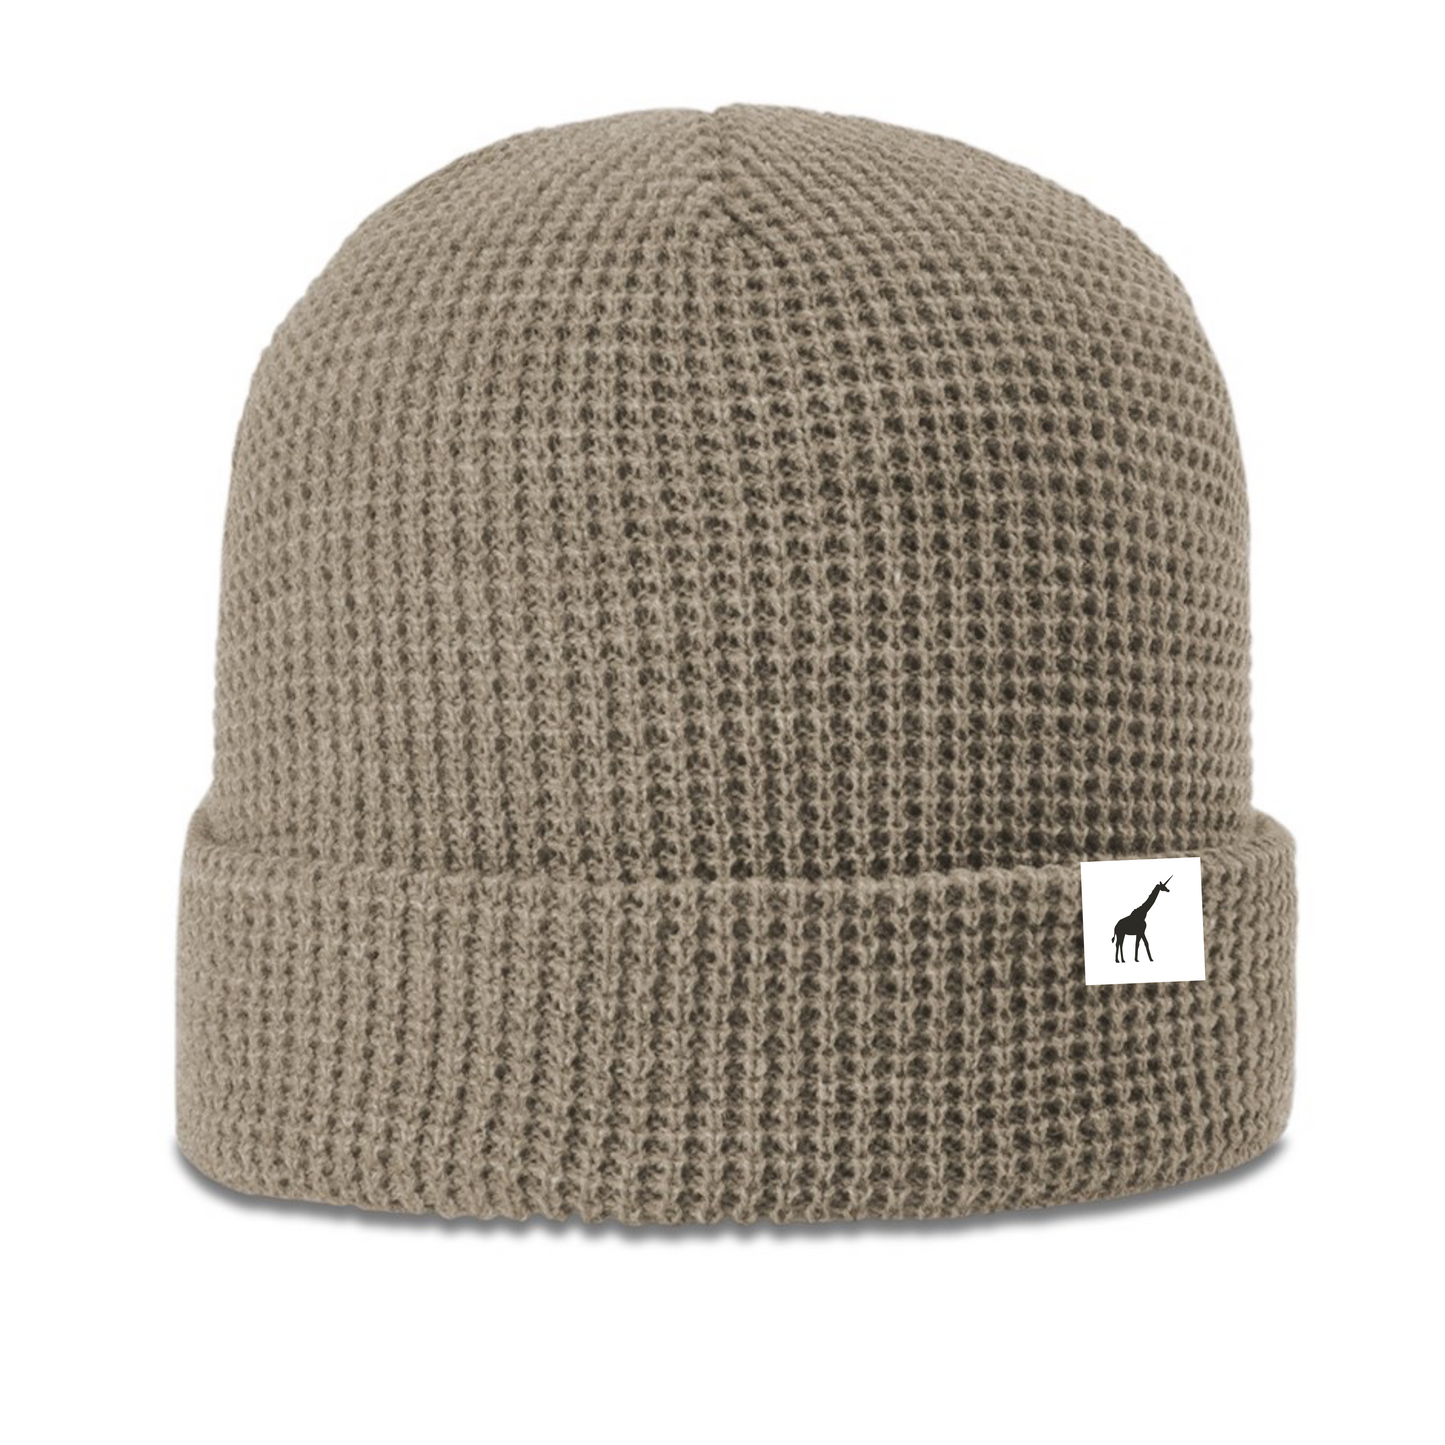 SheJumps Thermal Knit Beanies